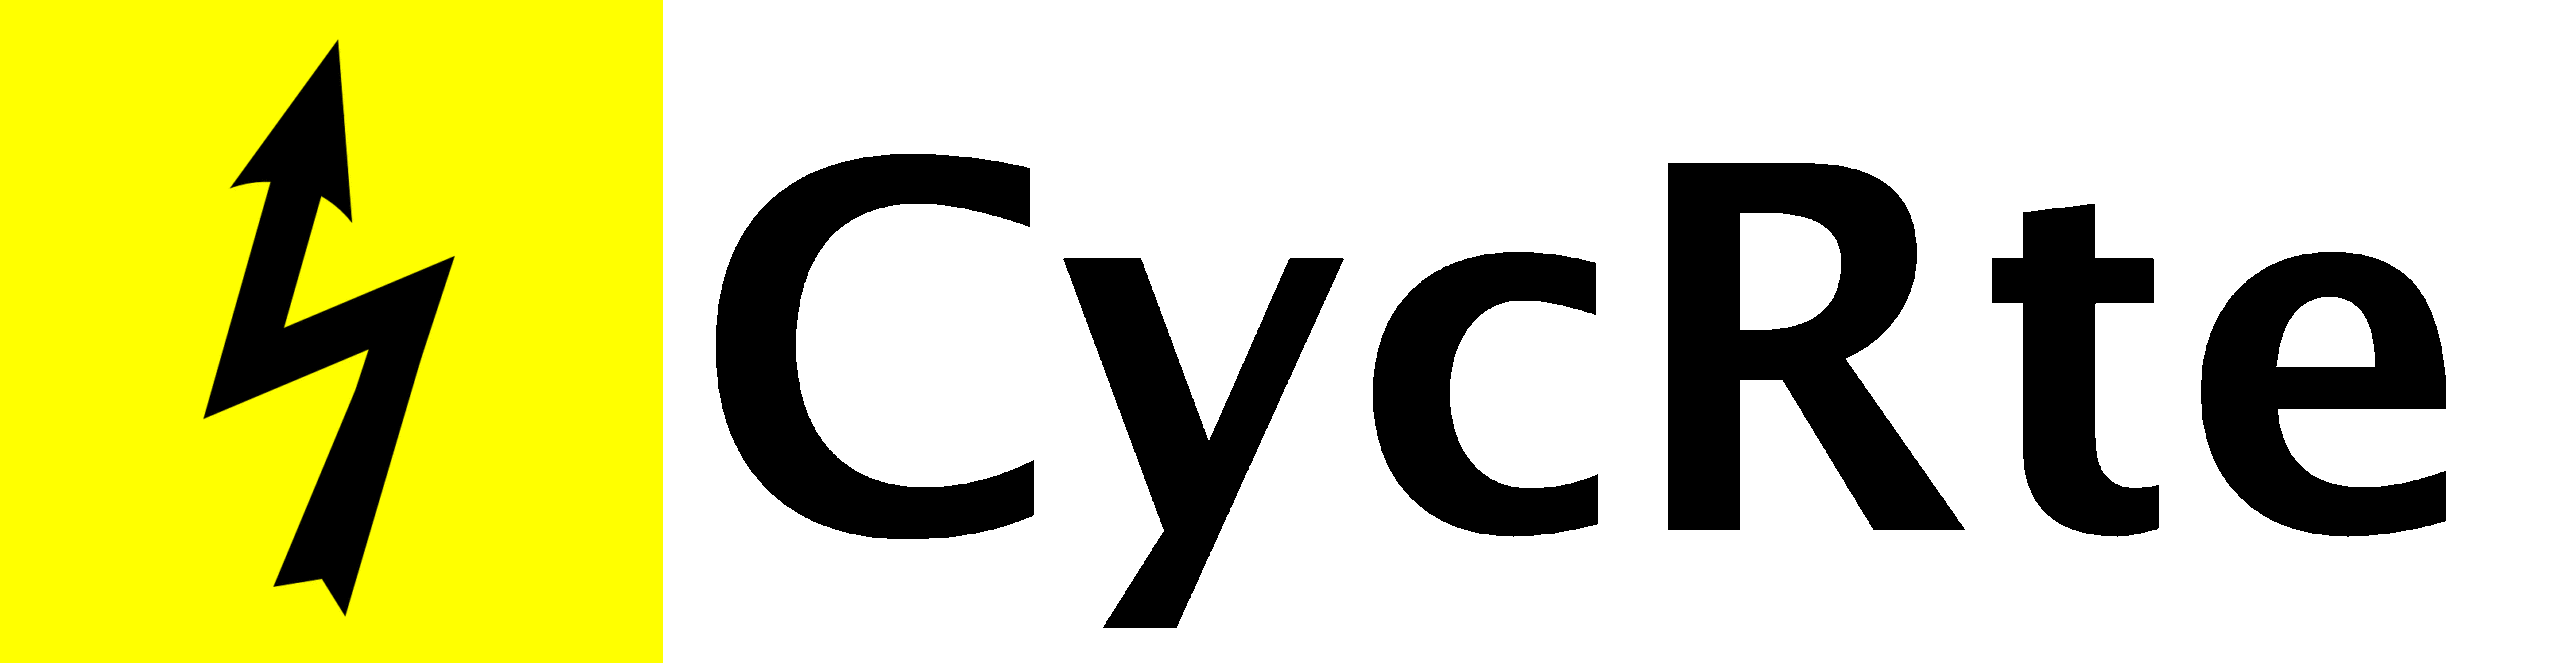 CycRte – Cycling Routes